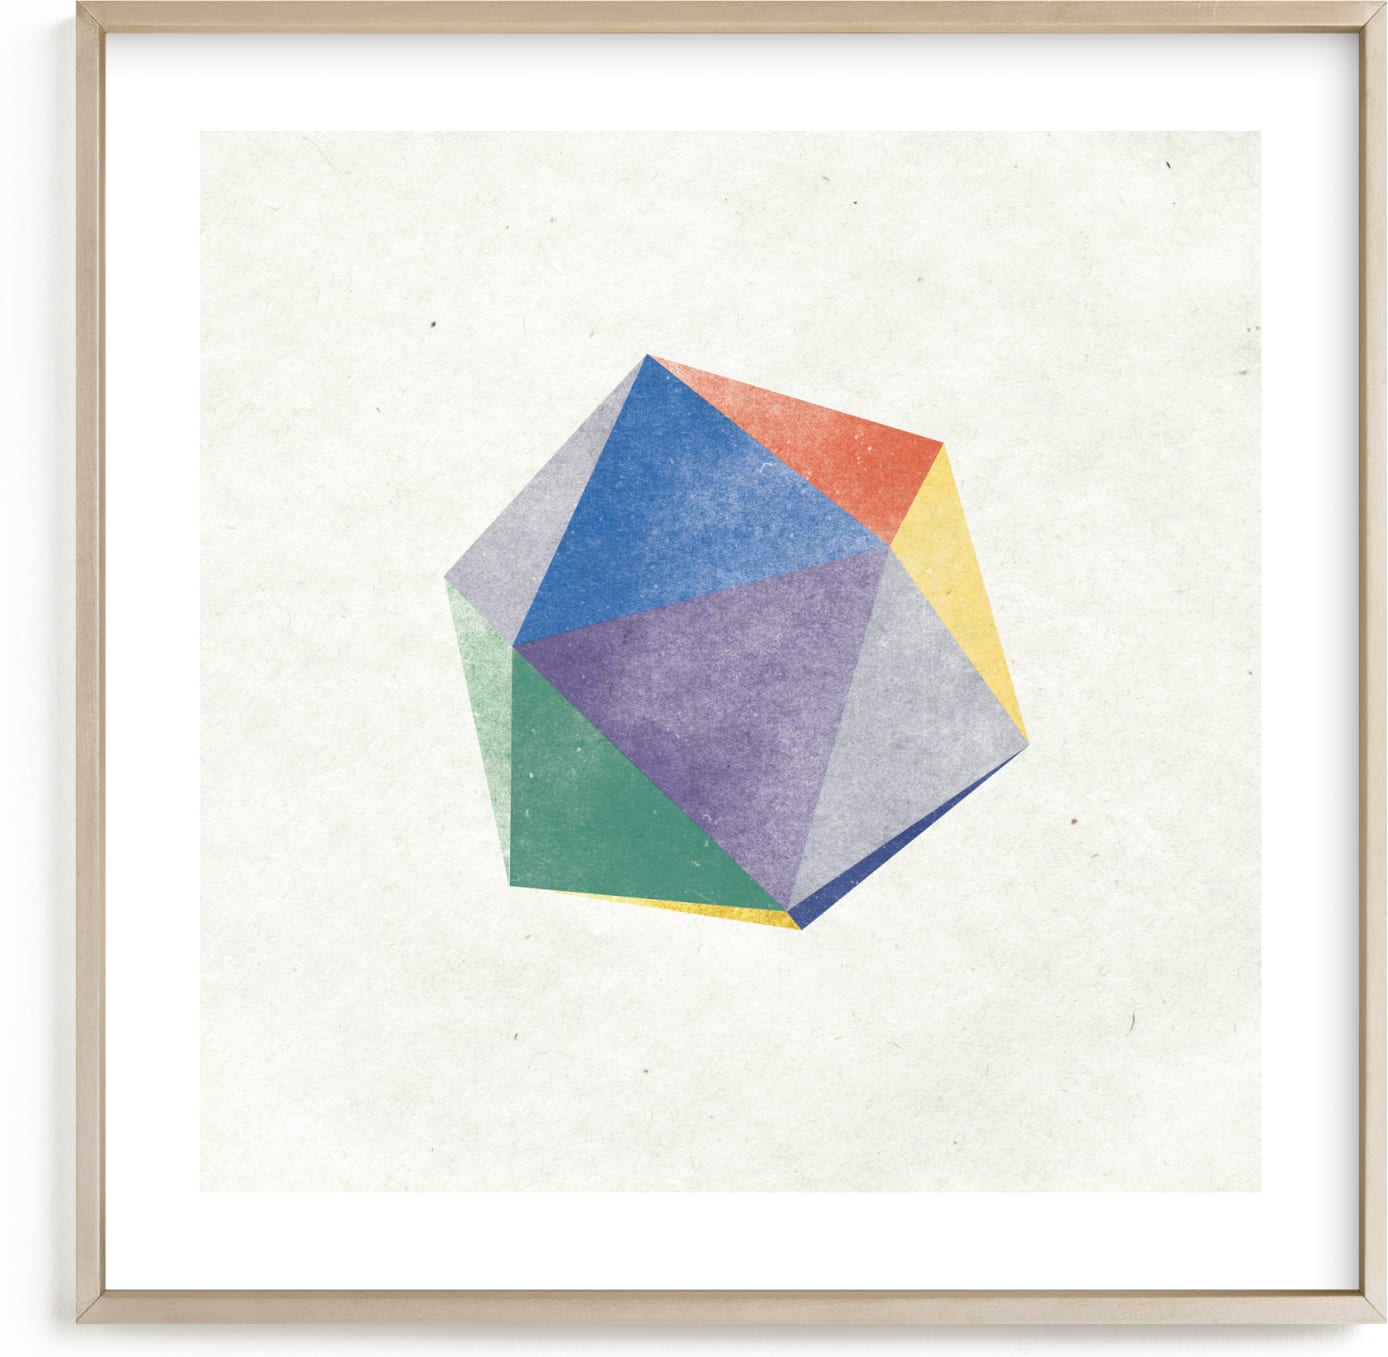 This is a colorful, purple, beige kids wall art by Sumak Studio called dreamy icosahedron.